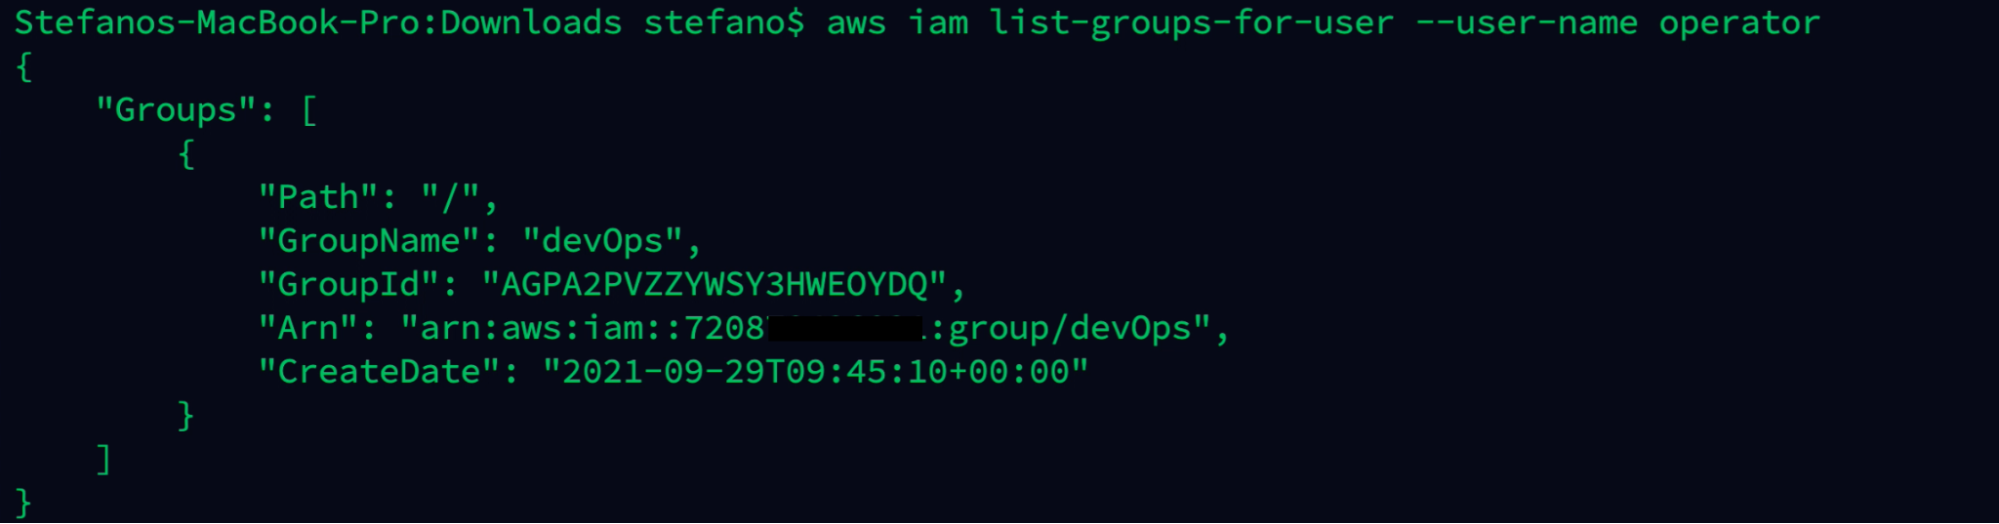 Output AWS command list group for user